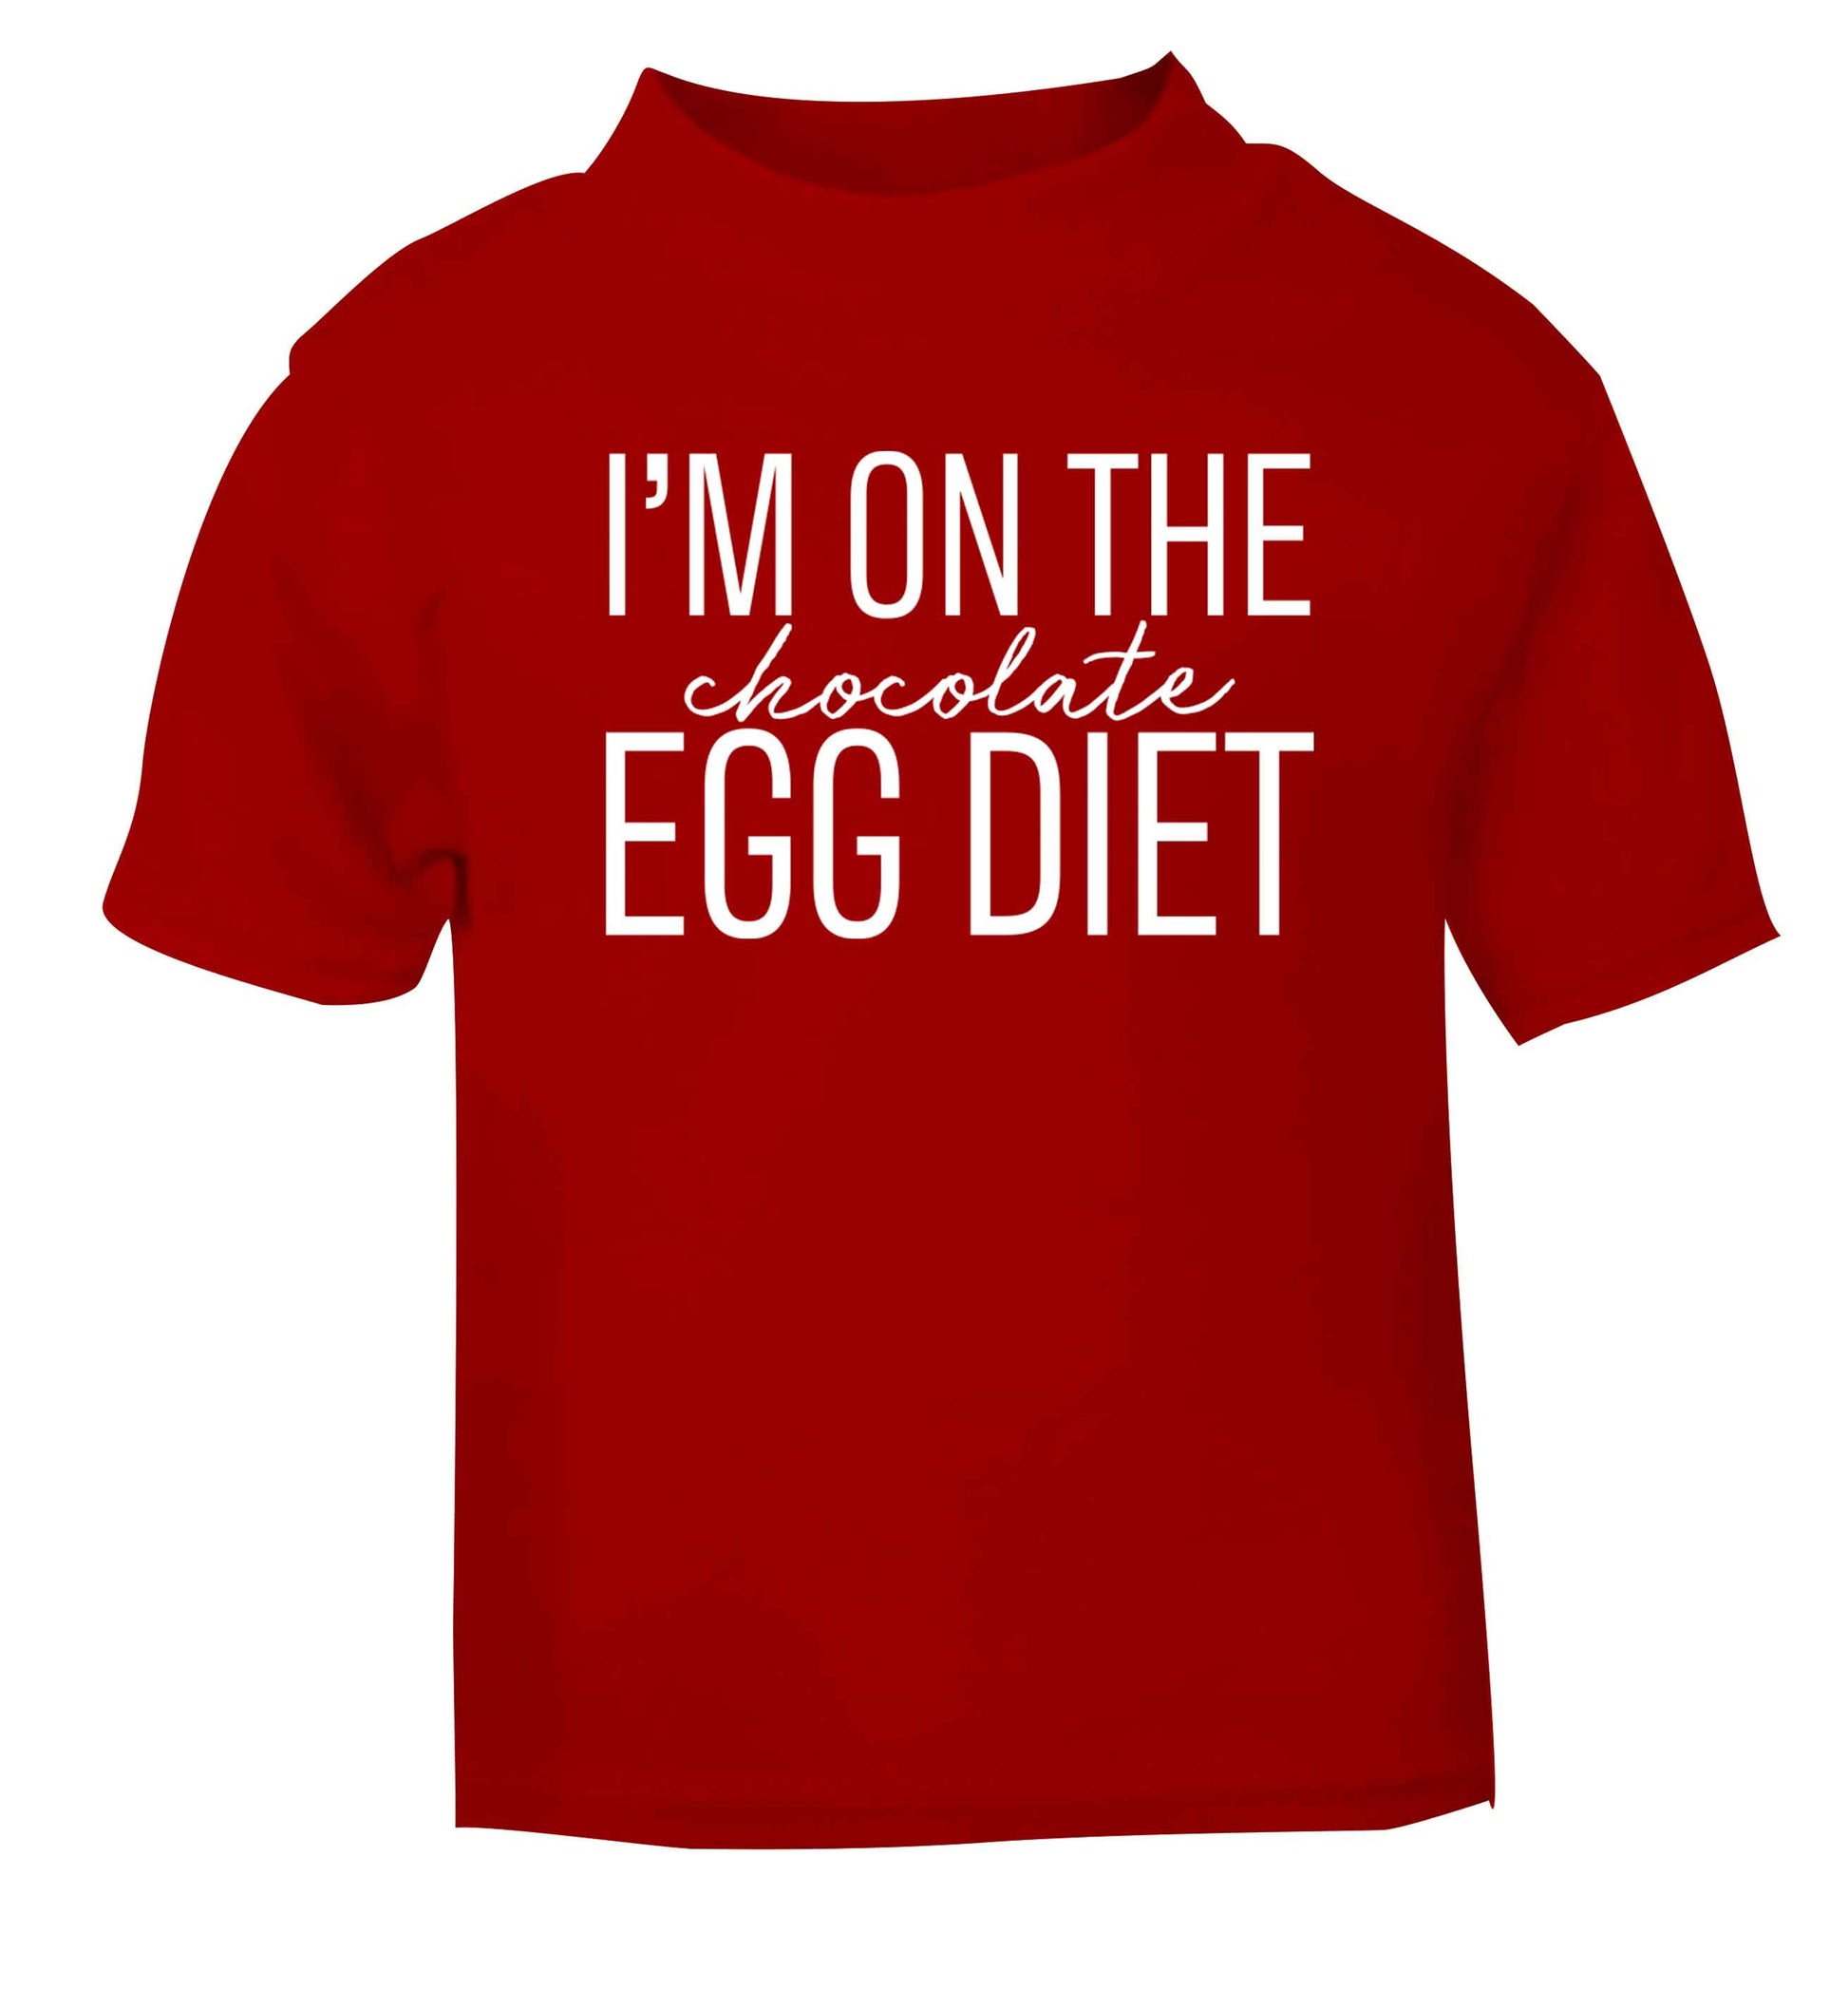 I'm on the chocolate egg diet red baby toddler Tshirt 2 Years